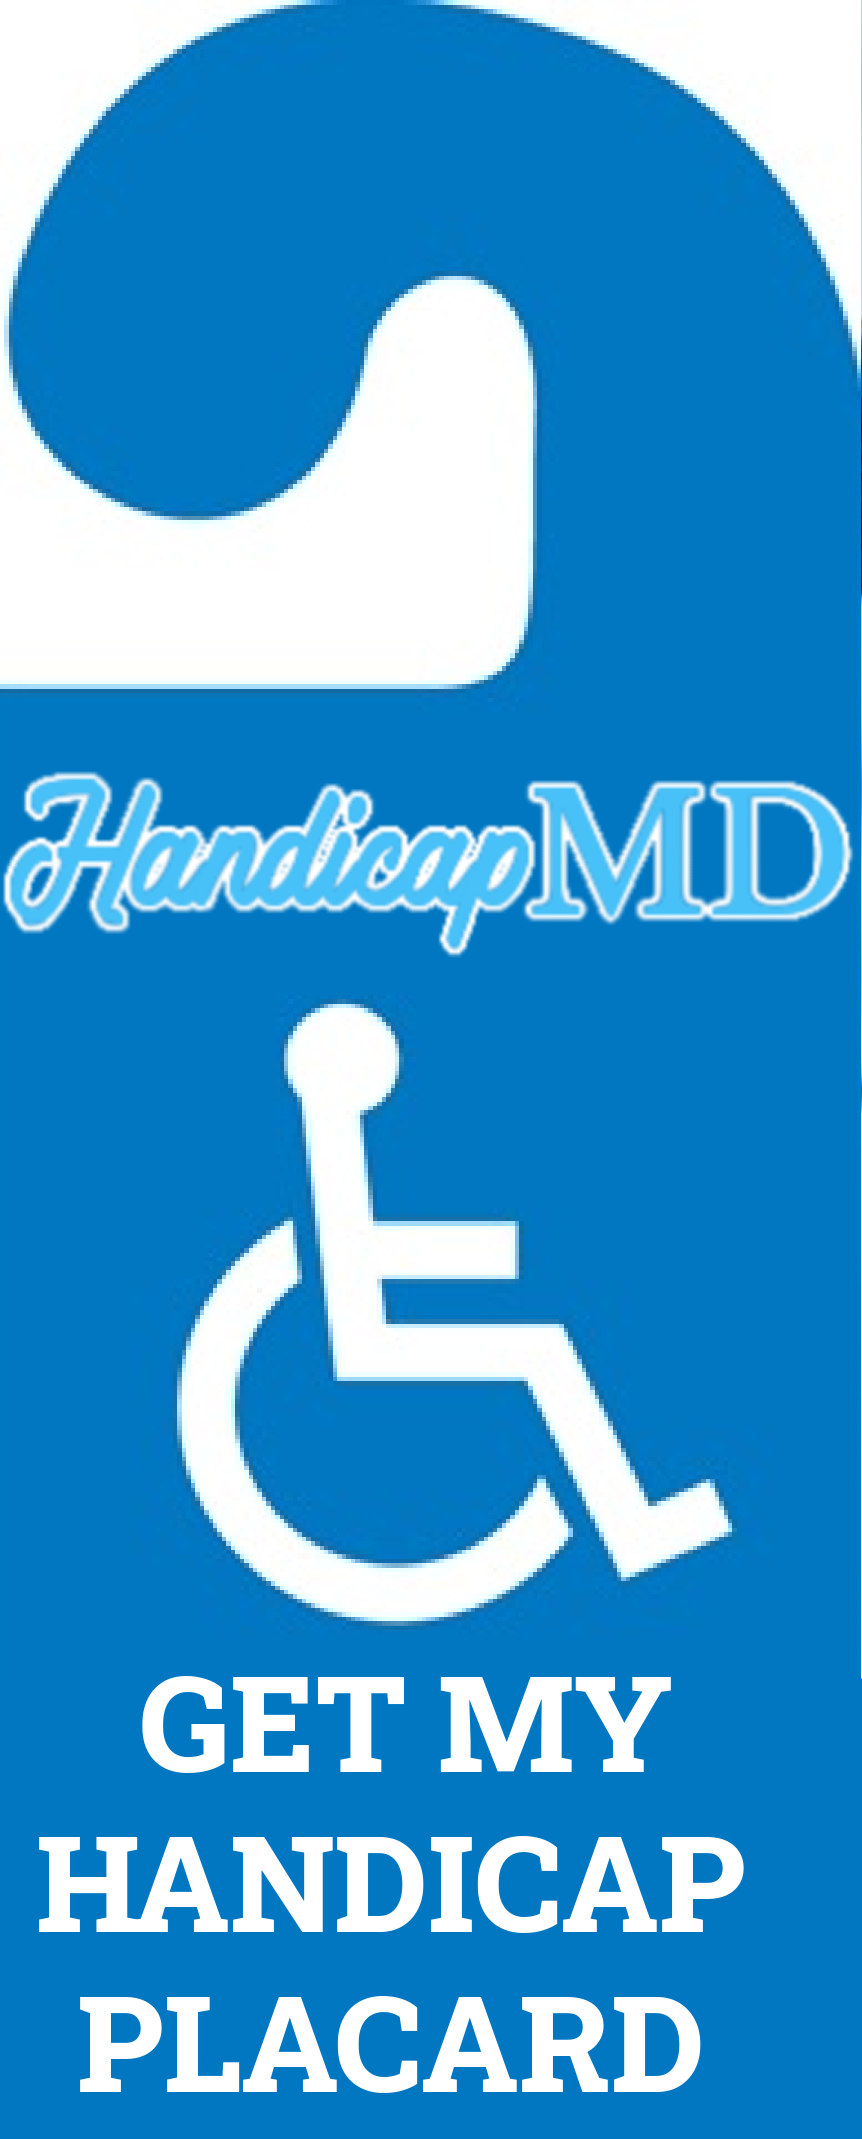 Tips for Making the Most of Your Handicap Placard in South Carolina